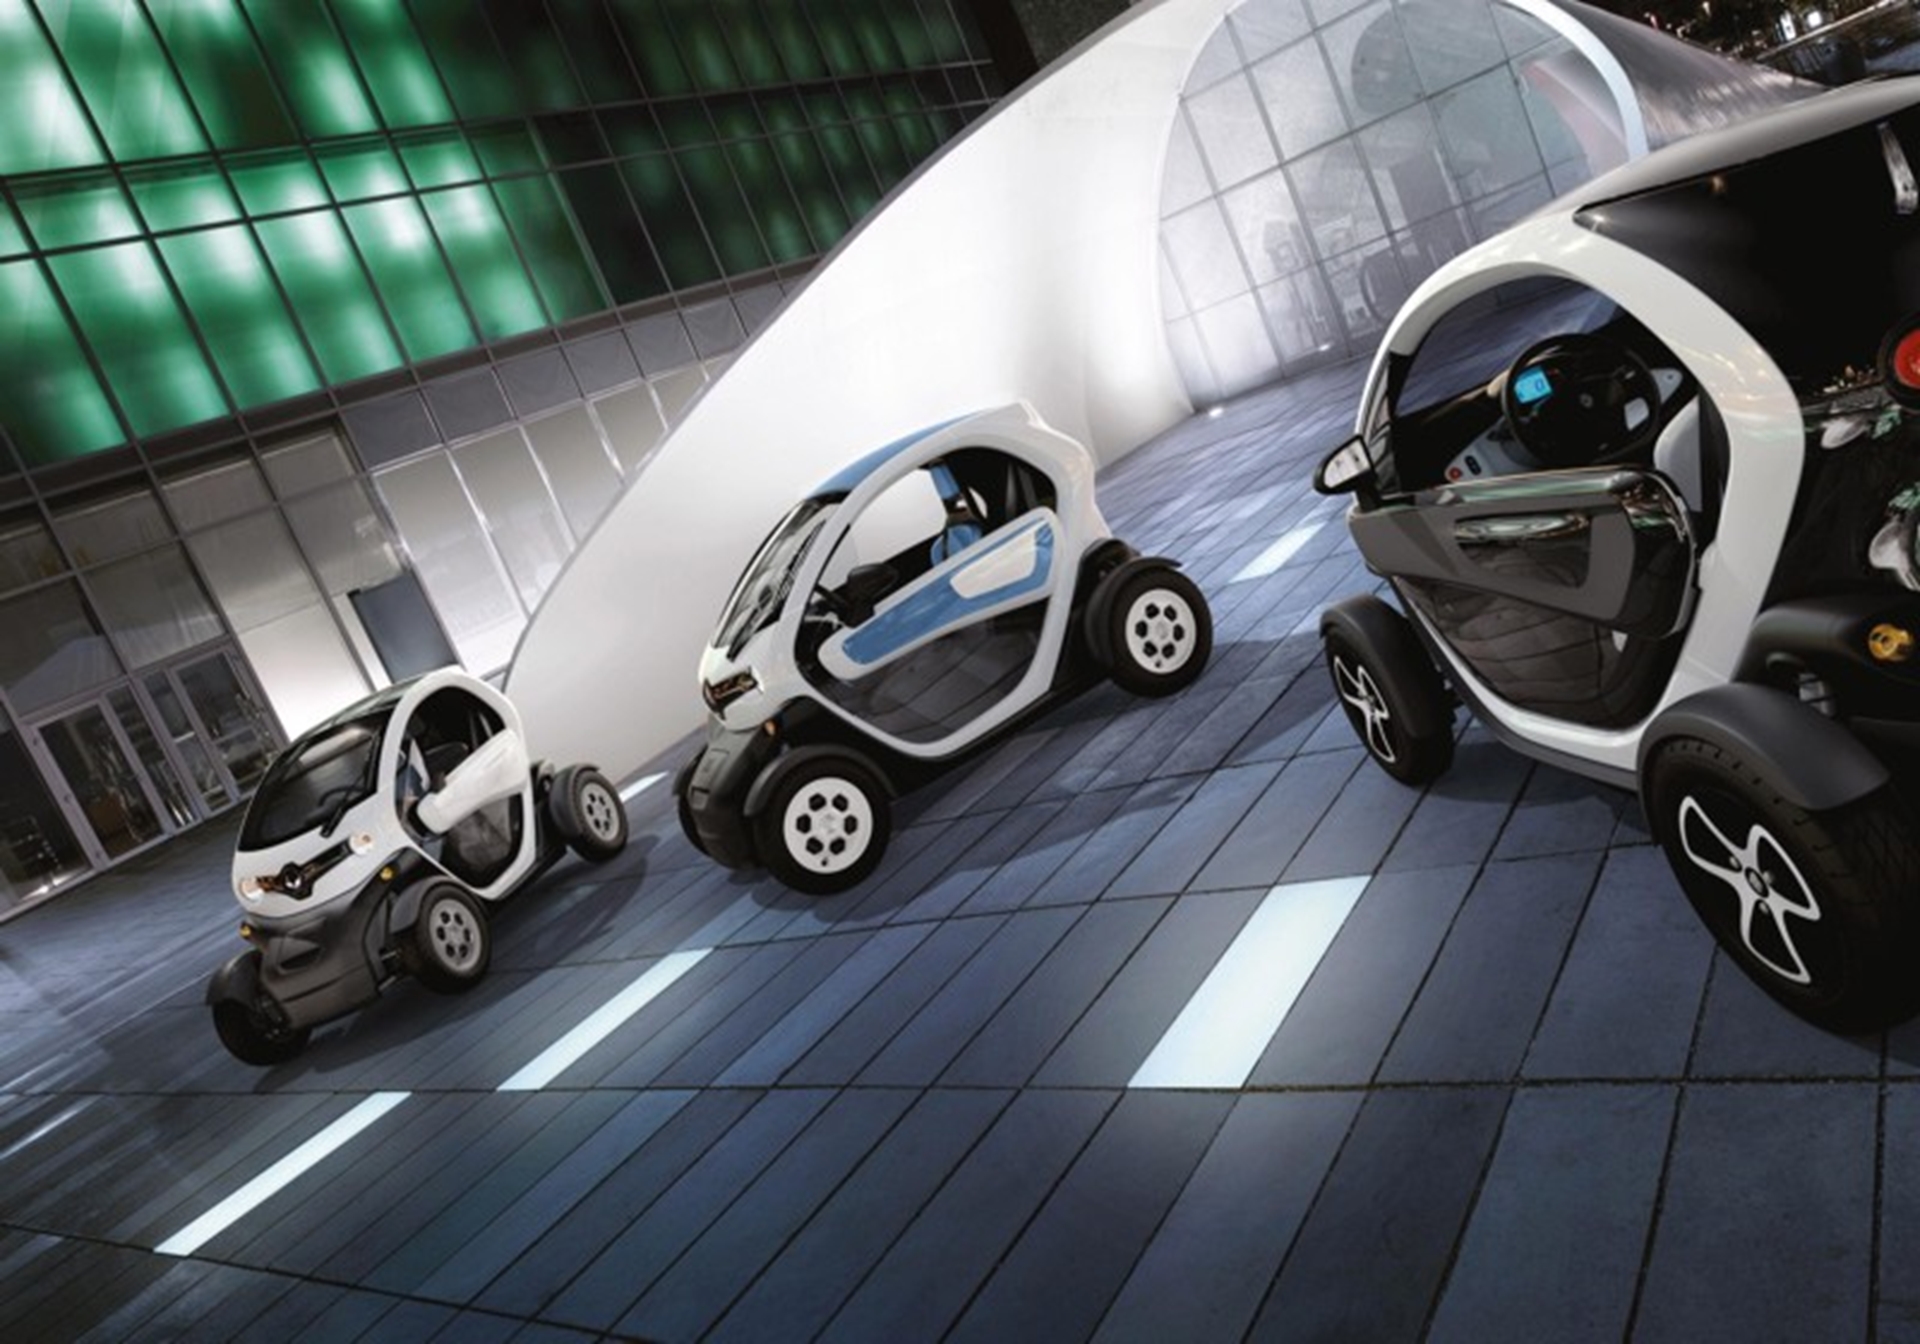 RENAULT TO GIVE ONE LUCKY STUDENT UP TO £9,000 TOWARDS UNIVERSITY TUITION FEES IN NEW TWIZY DESIGN COMPETITION